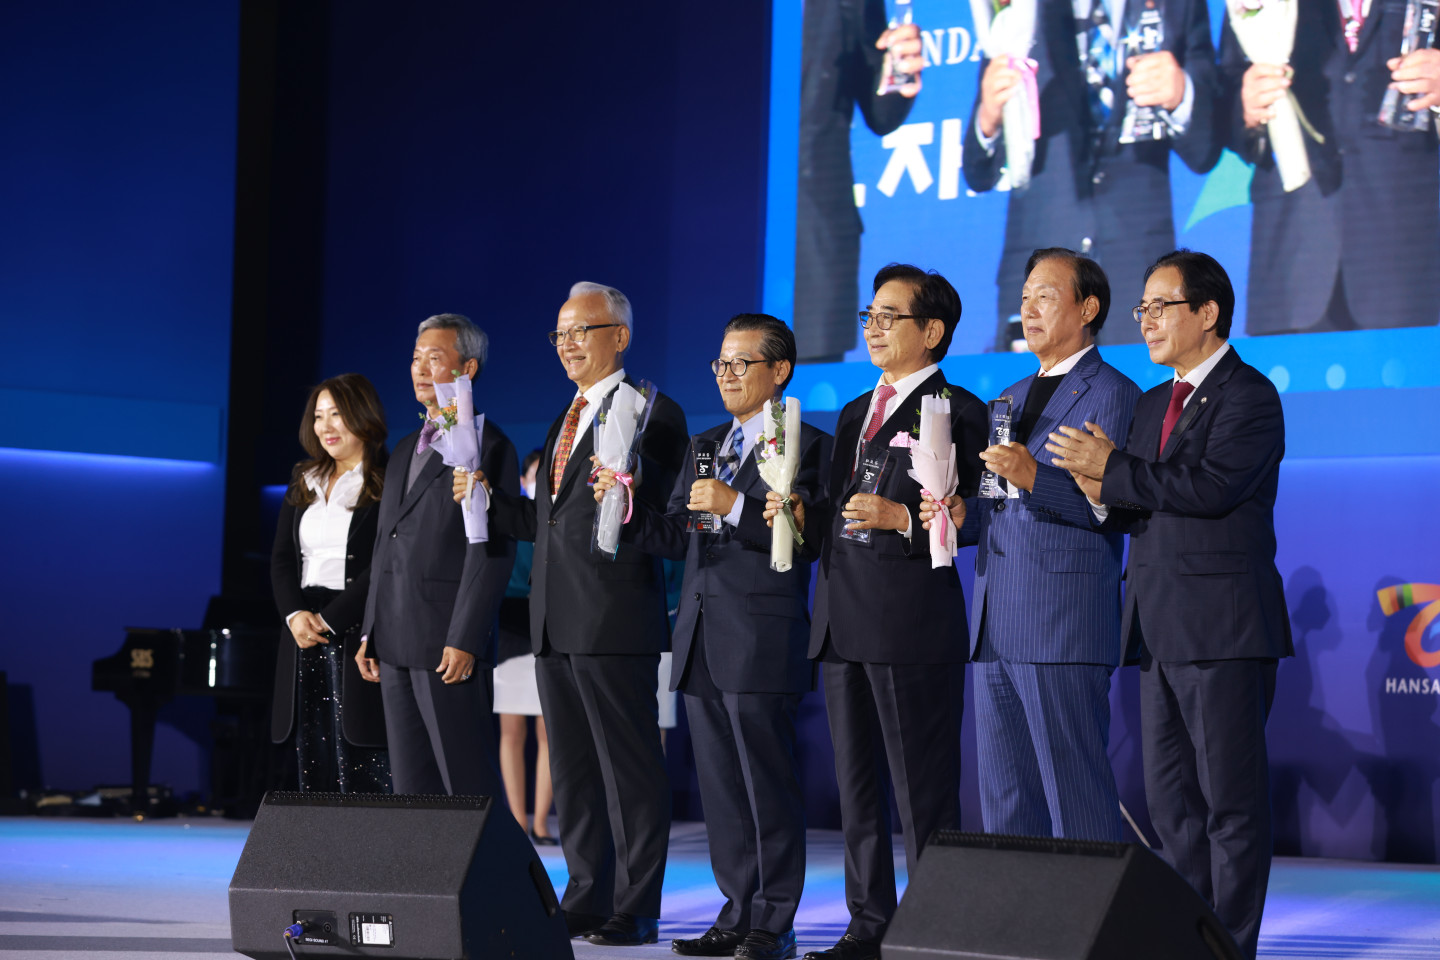 Award winners receiving their contribution plaques at the 20th Korean World Business Convention